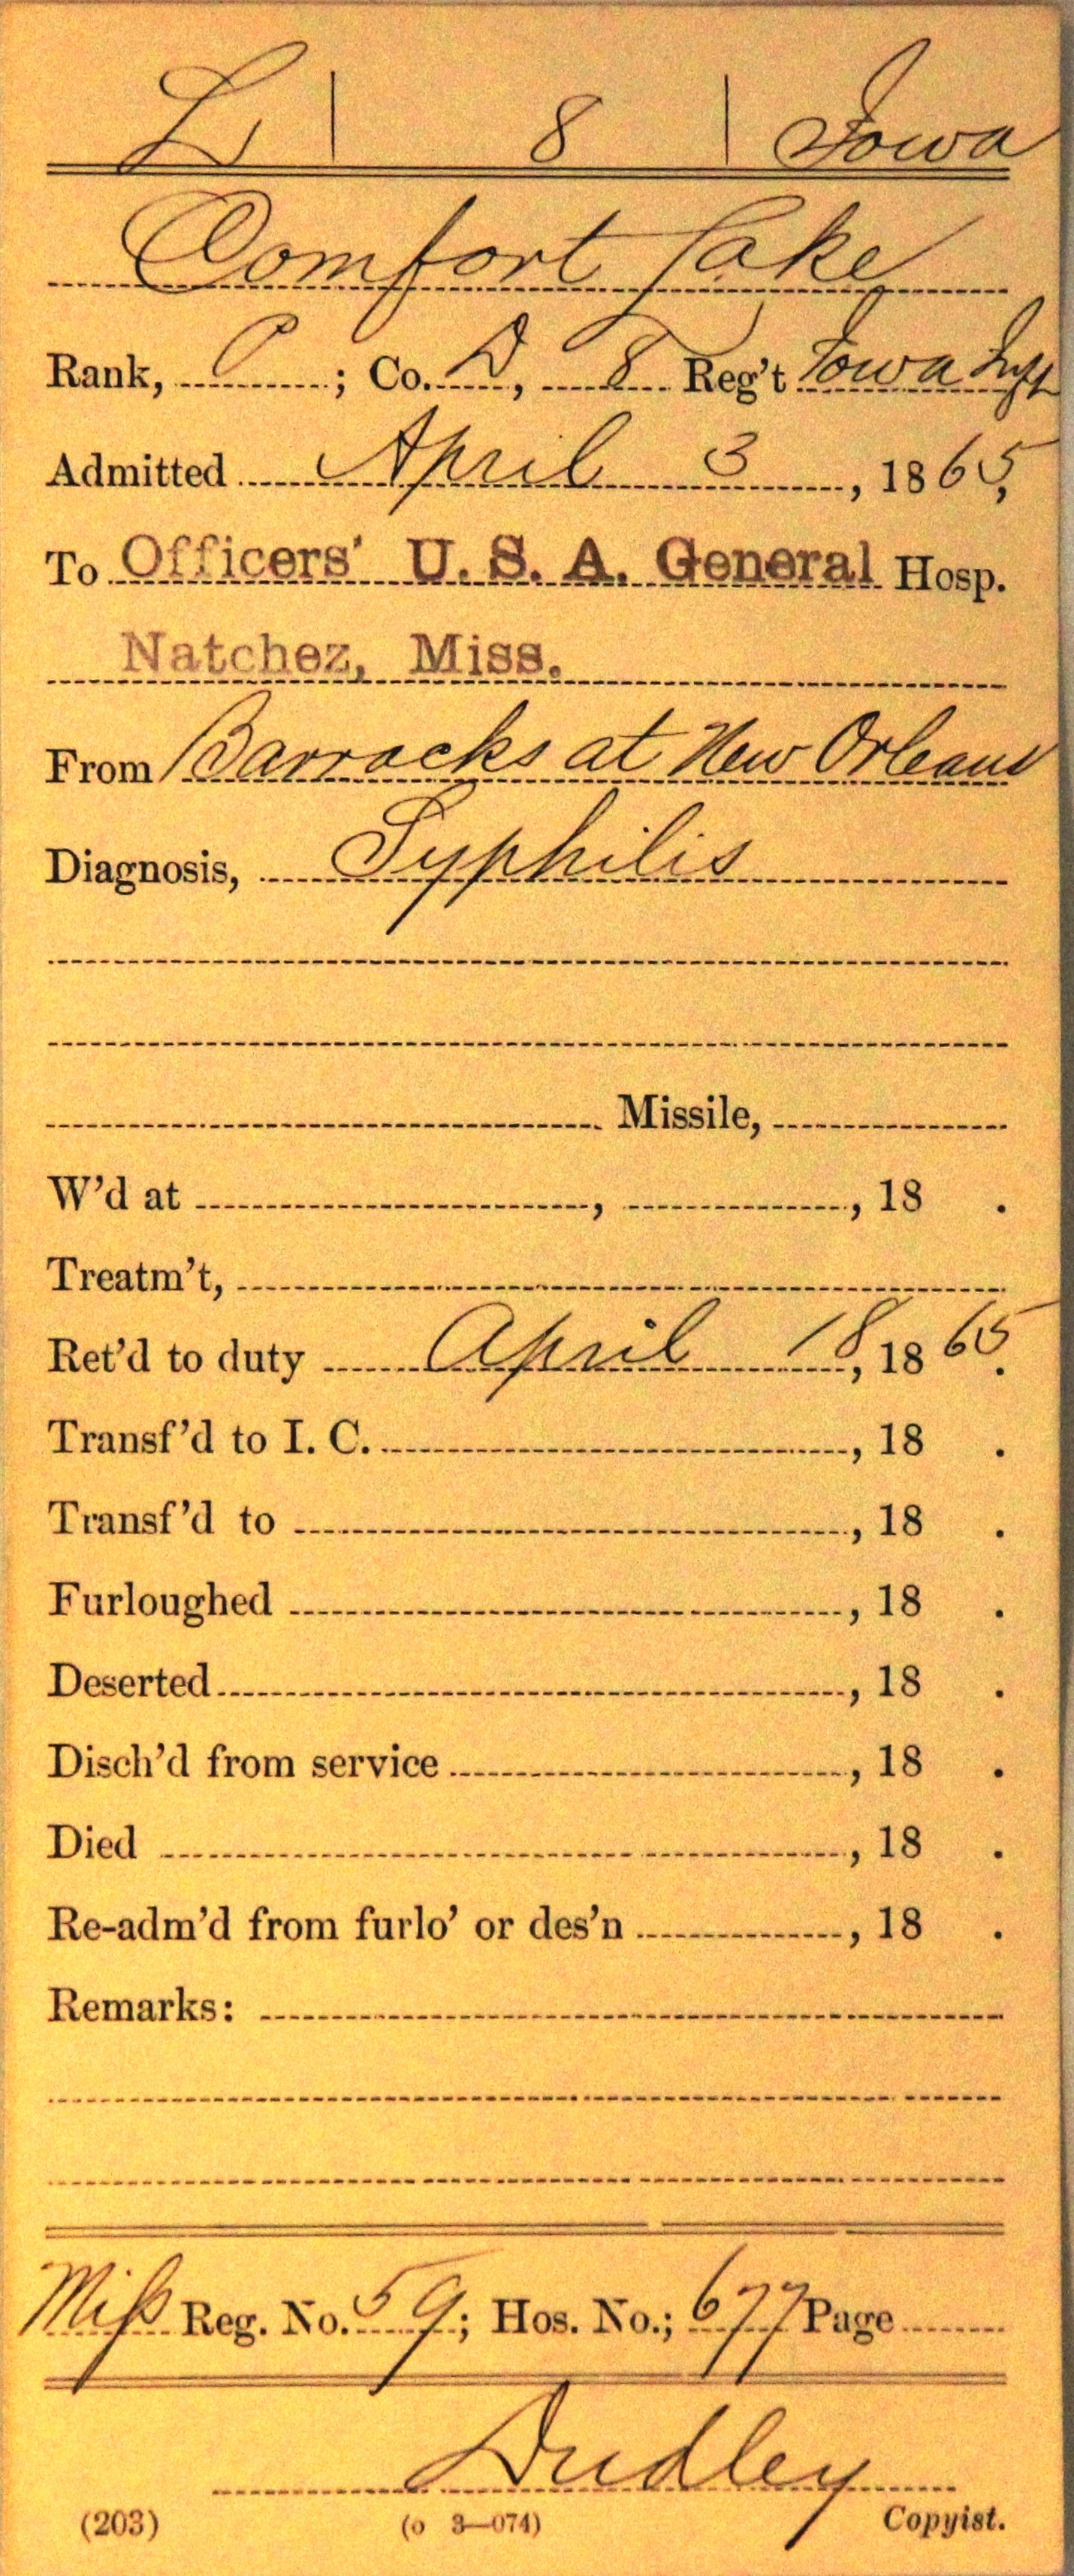 Officers' hospital card record containing the officer's name, rank, service, diagnosis, name, admission date, hospital location, and treatment outcome. 